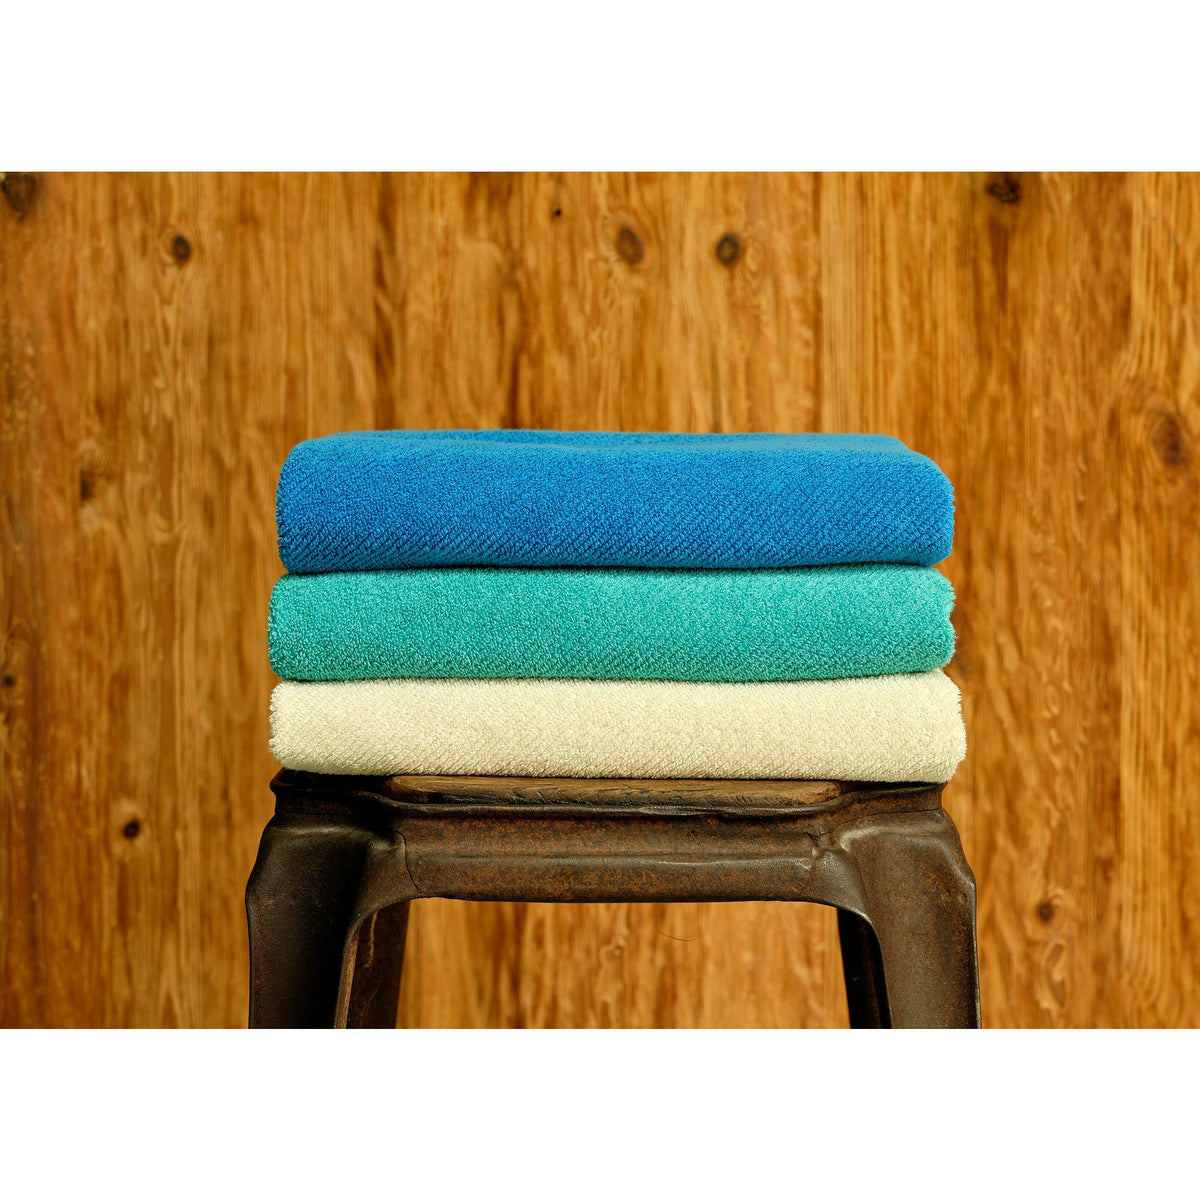 Abyss Twill Bath Towels Stack on Stool Fine Linens